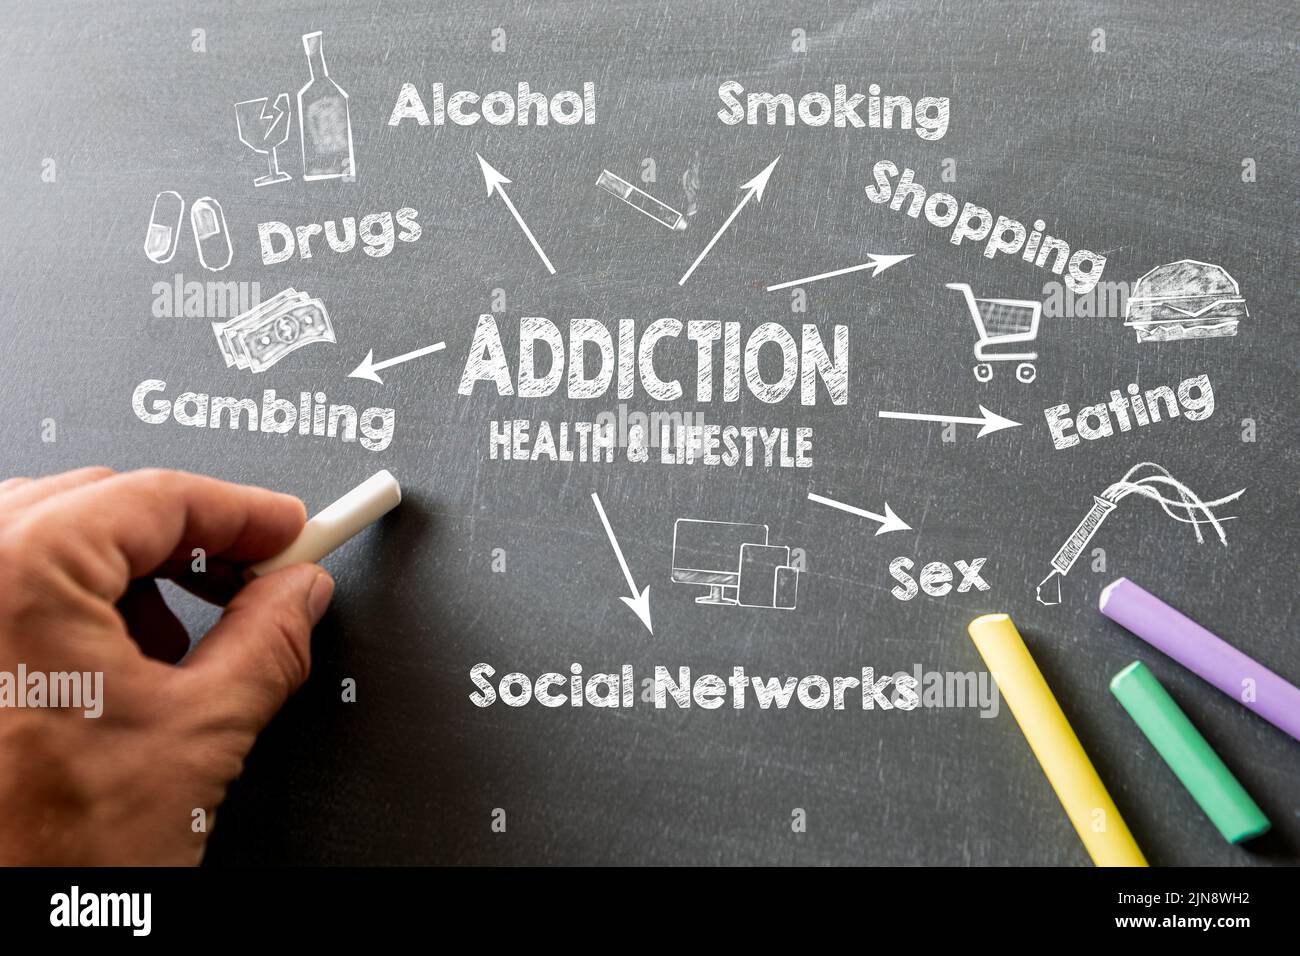 Addiction, health and lifestyle concept. Chart with keywords and icons on blackboards. Stock Photo